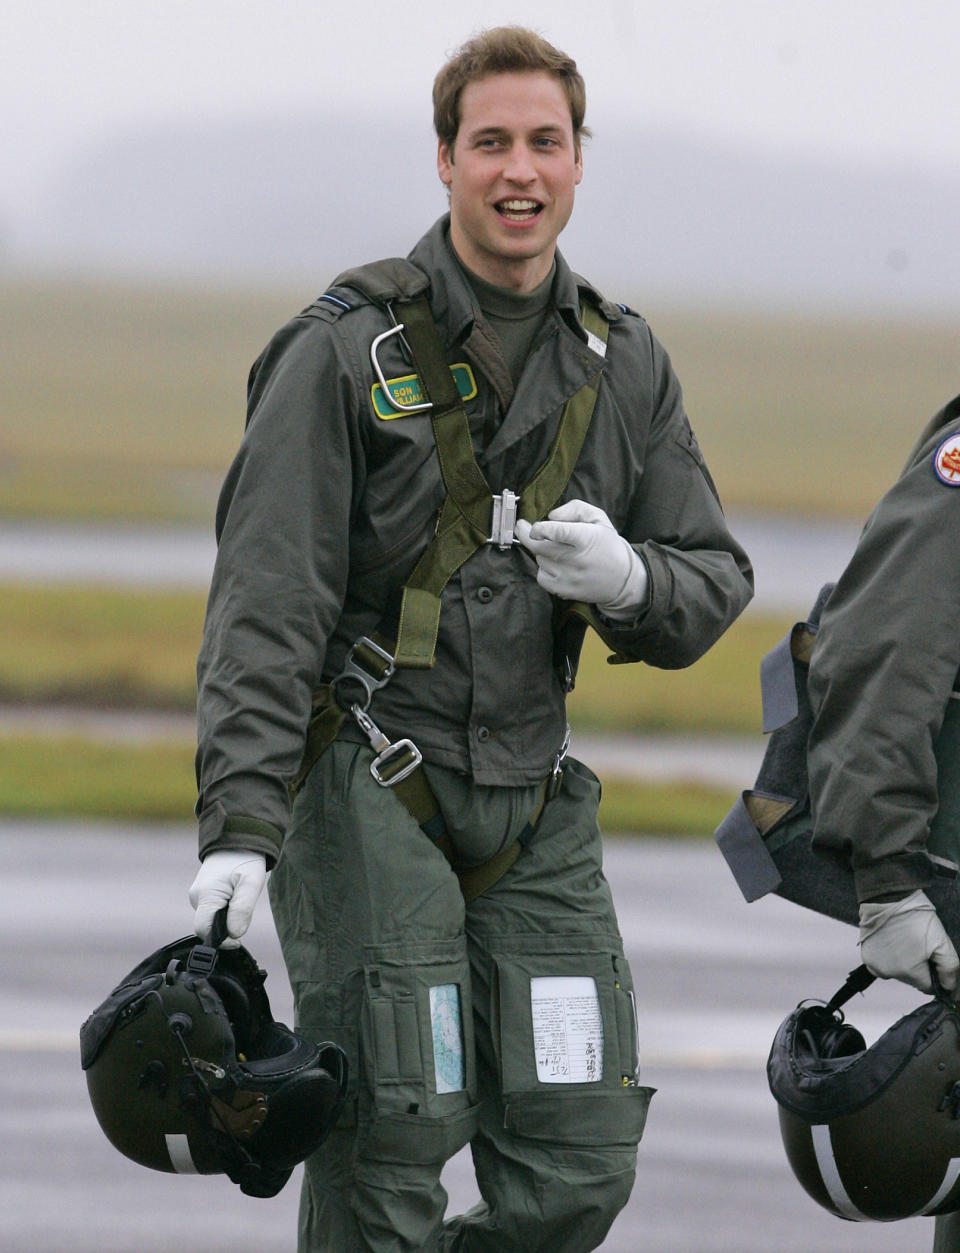 FILE Britain's Prince William gestures as he walks across the airfield at RAF Cranwell, Lincolnshire, England, Thursday, Jan. 17, 2008. The world watched as Prince William grew from a towheaded schoolboy to a dashing air-sea rescue pilot to a father of three. But as he turns 40 on Tuesday, June 21, 2022, William is making the biggest change yet: assuming an increasingly central role in the royal family as he prepares for his eventual accession to the throne. (AP Photo/Kirsty Wigglesworth, File)